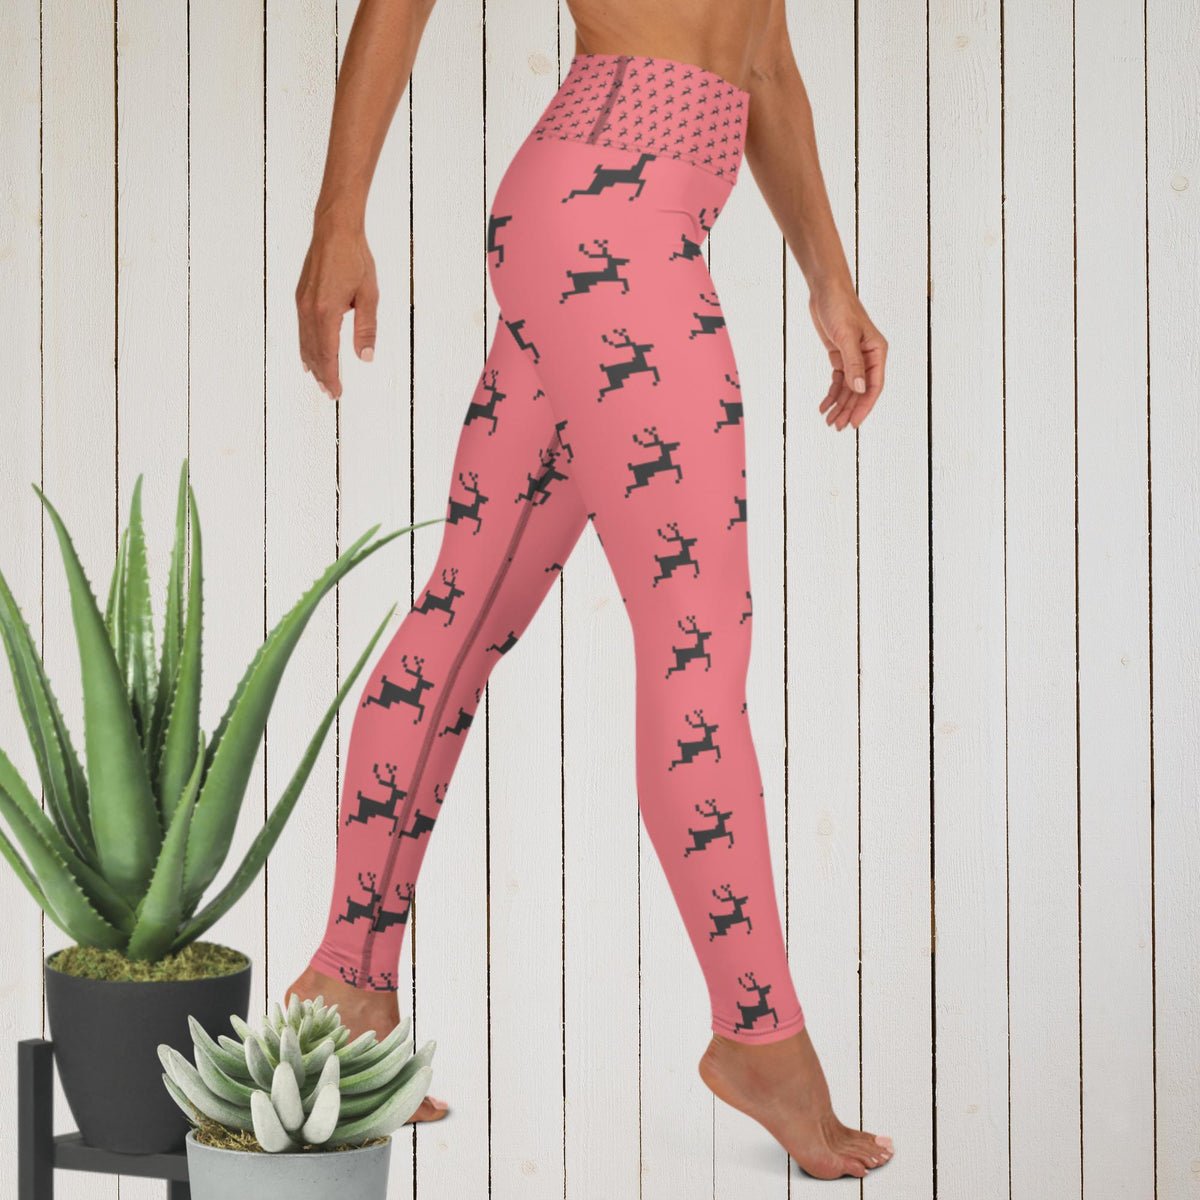 Floral Leggings ID52 - AIW Art Gifts